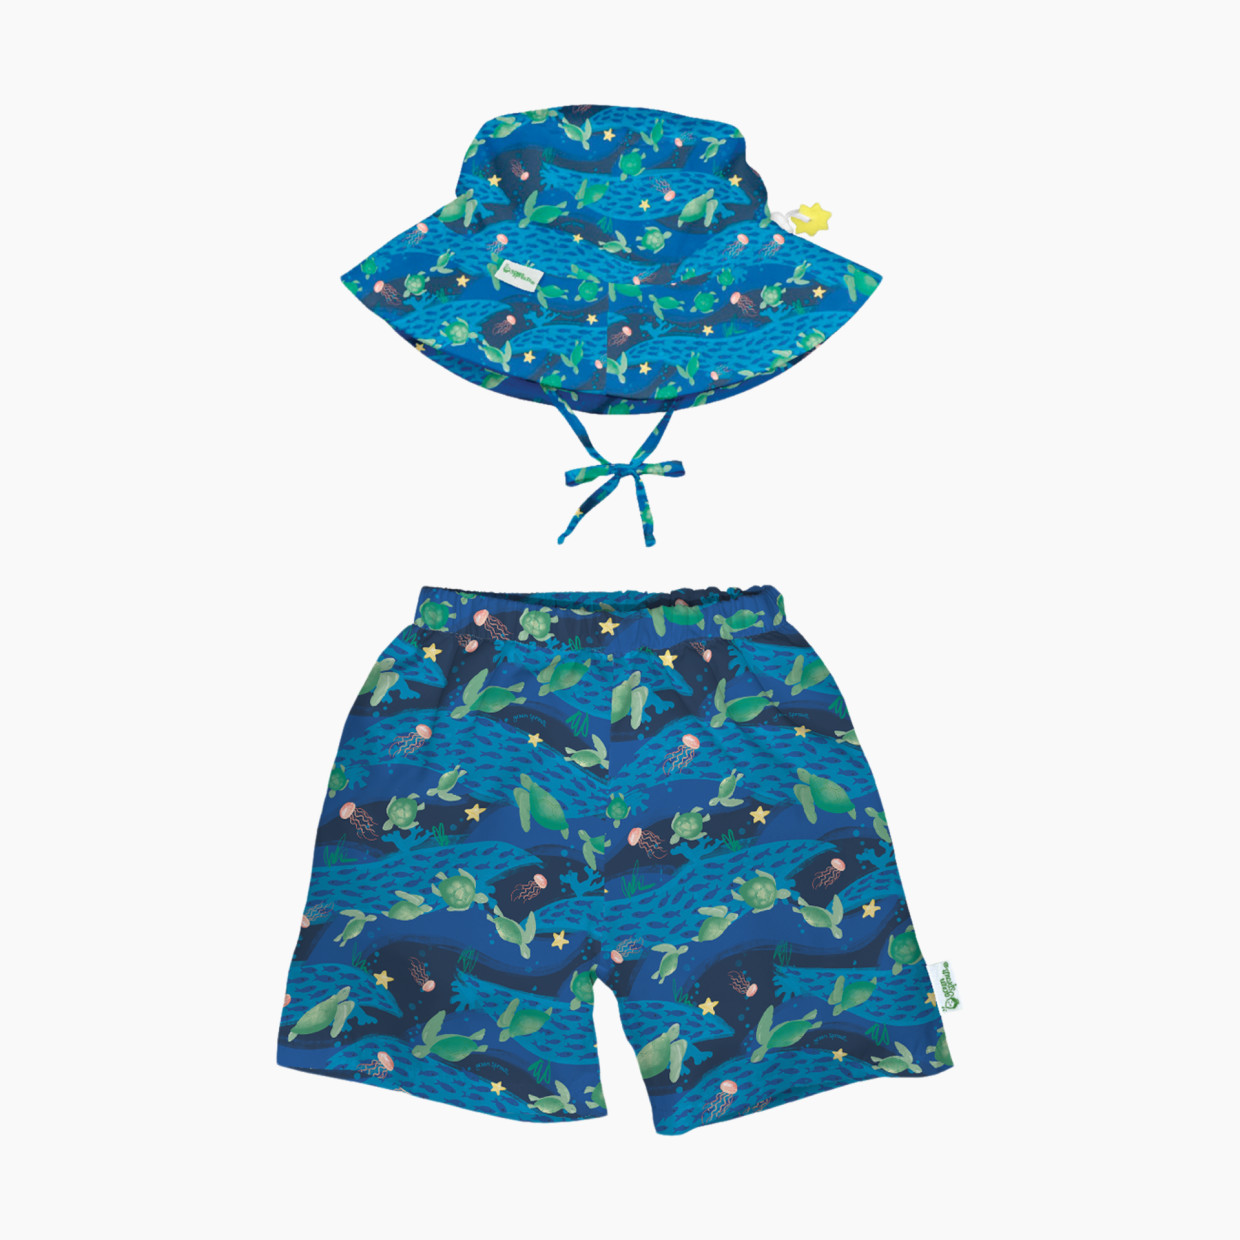 GREEN SPROUTS UPF 50+ Swim Trunks with Built-in Diaper & Hat - Navy Turtle Journey, 0-6 Months.